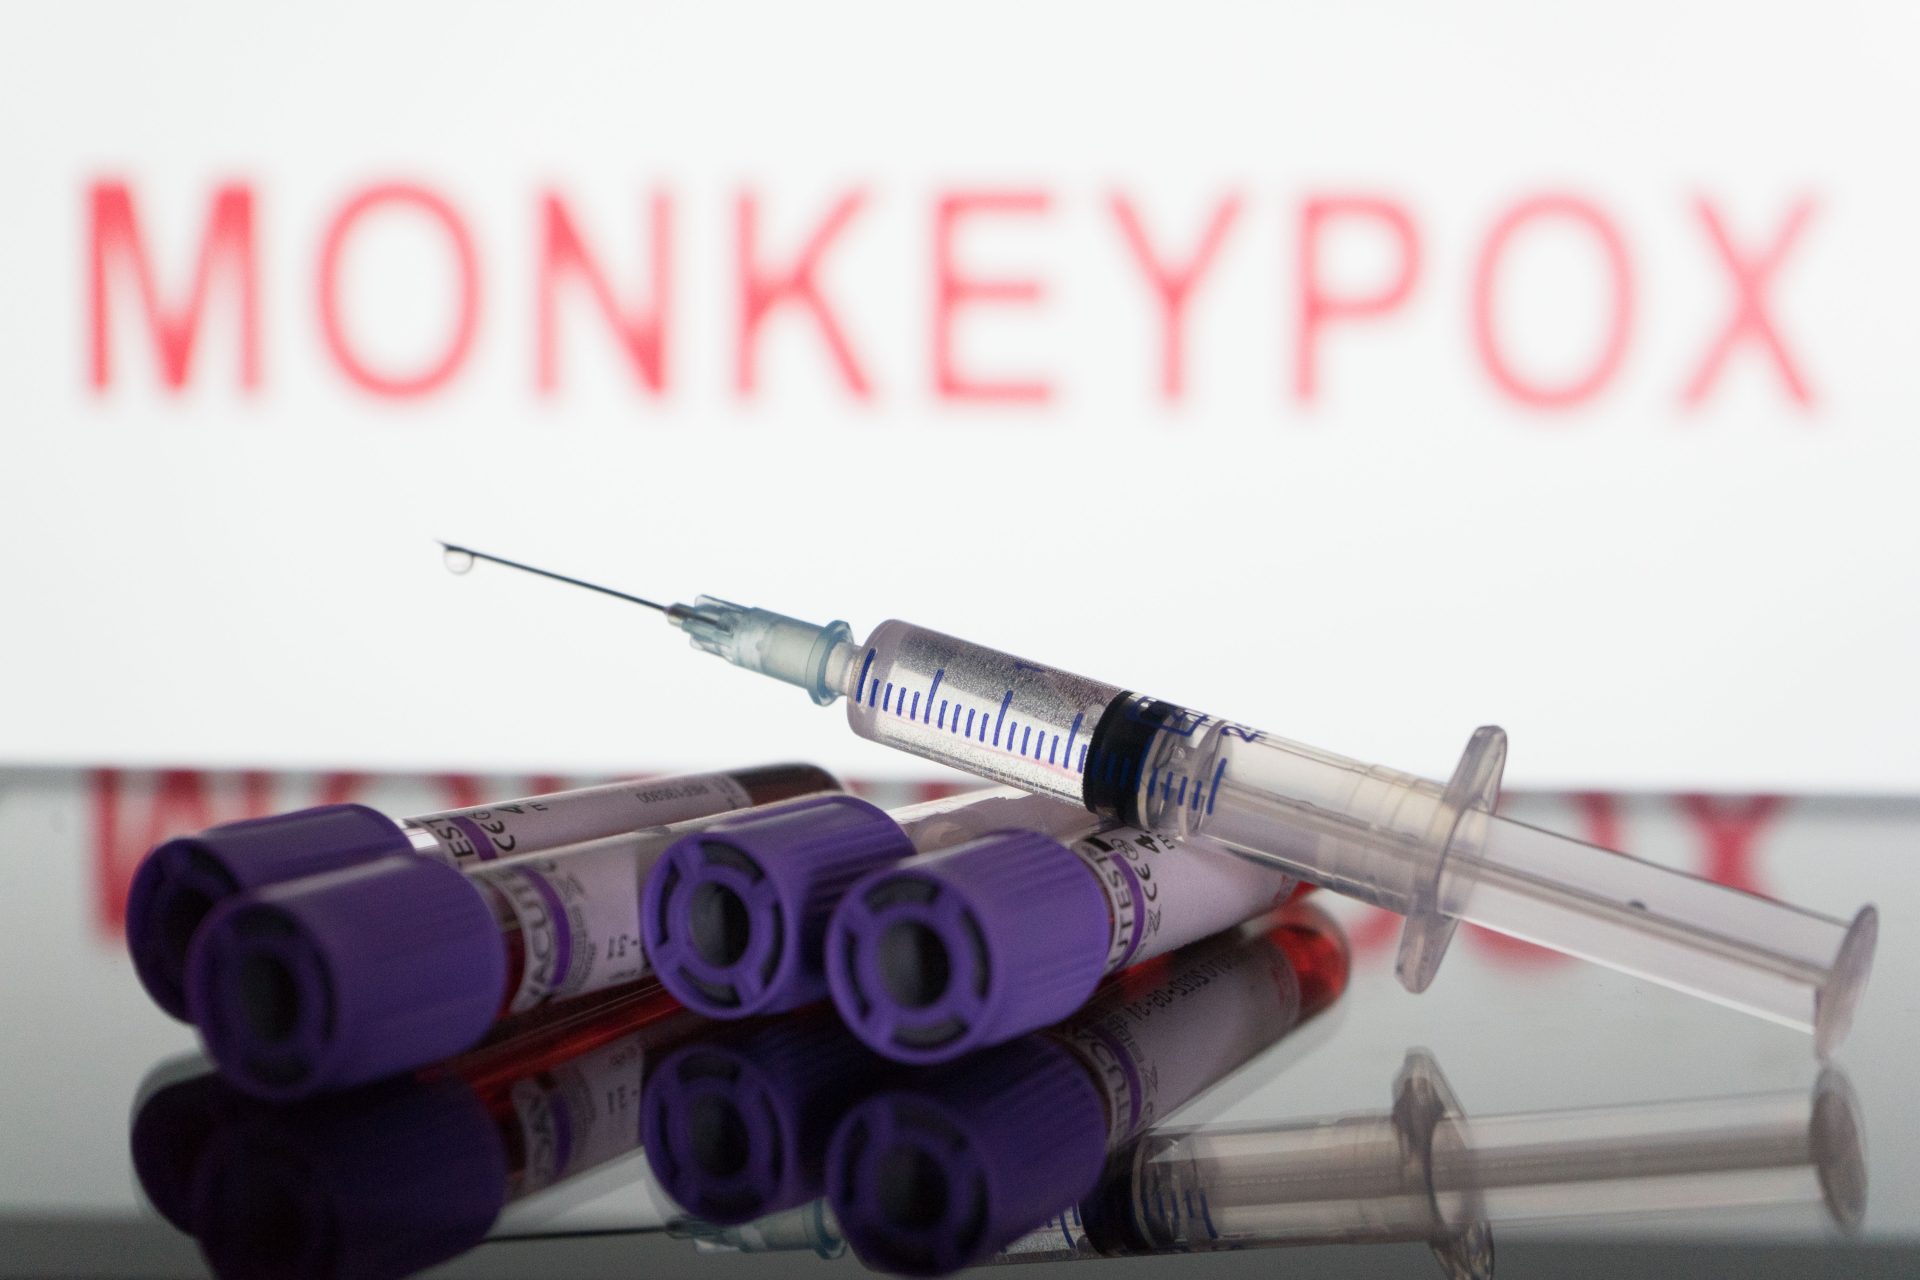 World Health Organization Asks Public For New Name Suggestions For Monkeypox Virus Due To Negative Public Reaction To Current Name